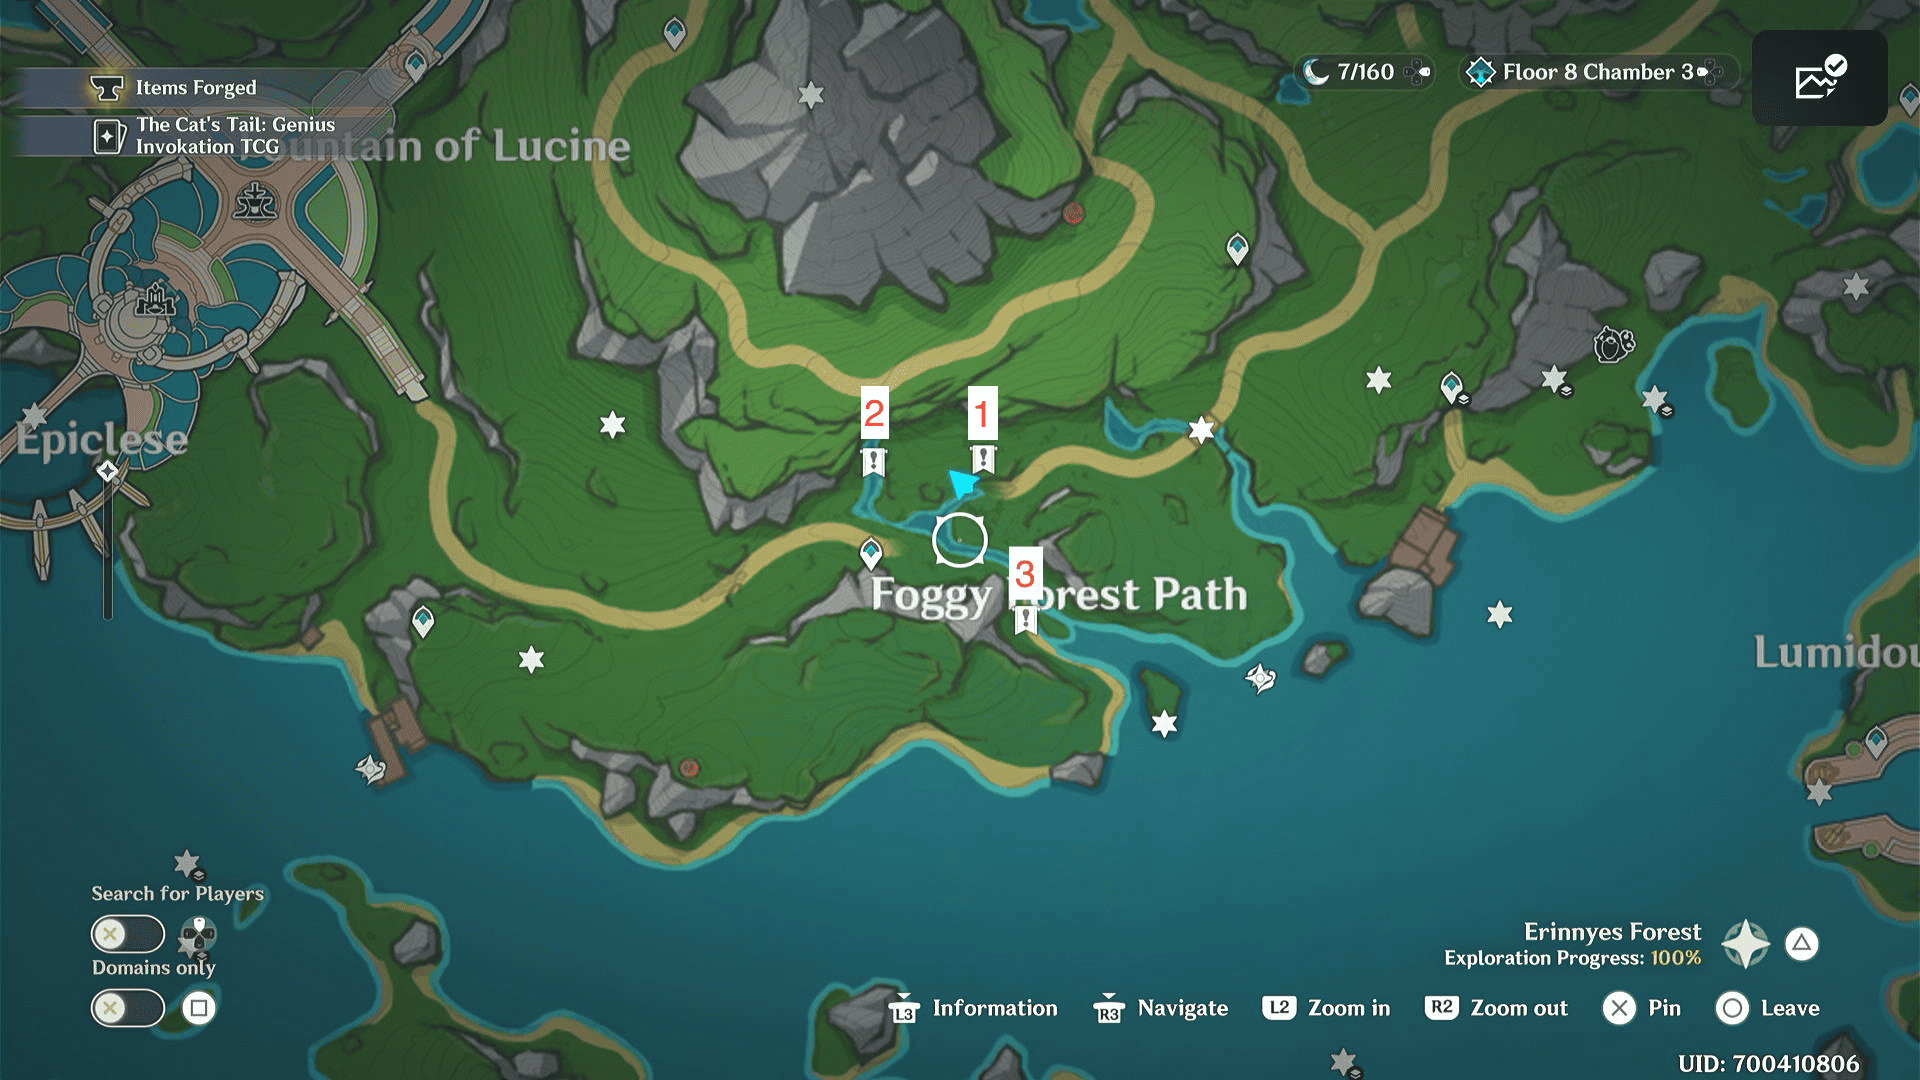 All three foggy forest path puzzles on the map in Genshin Impact